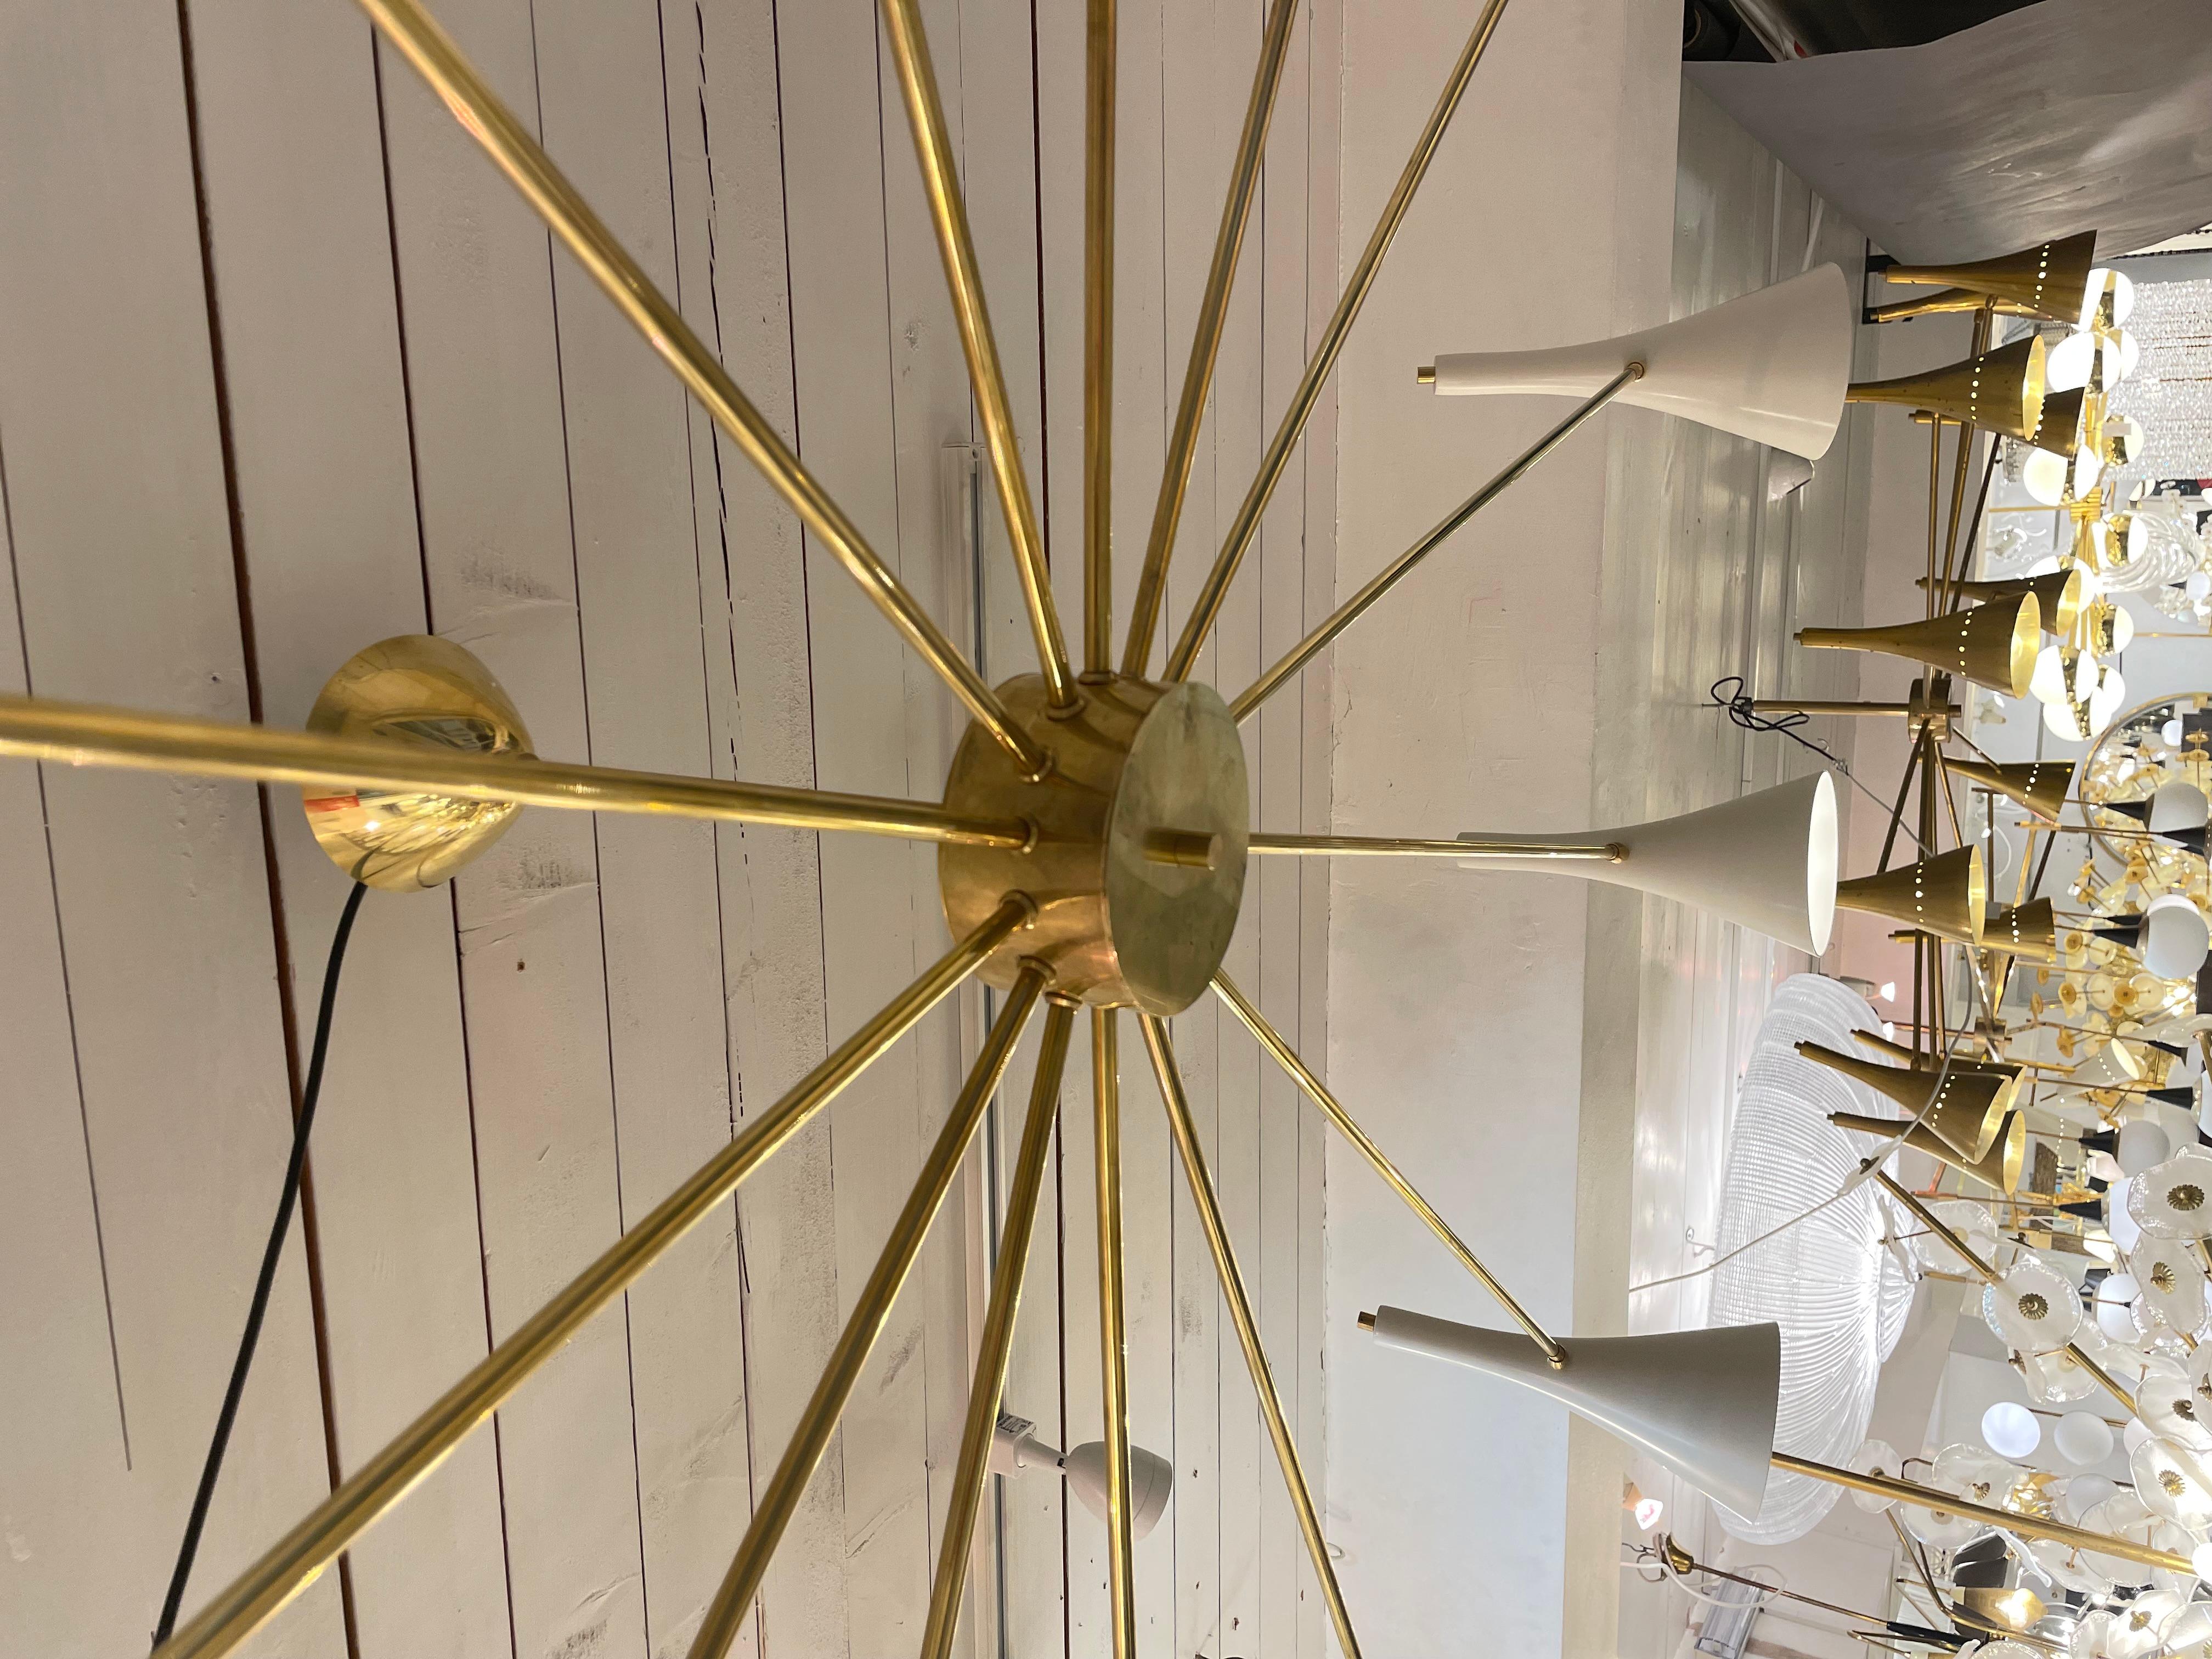 Late 20th Century Italian Modernist Chandelier in Brass with 14 Arms, circa 1970 For Sale